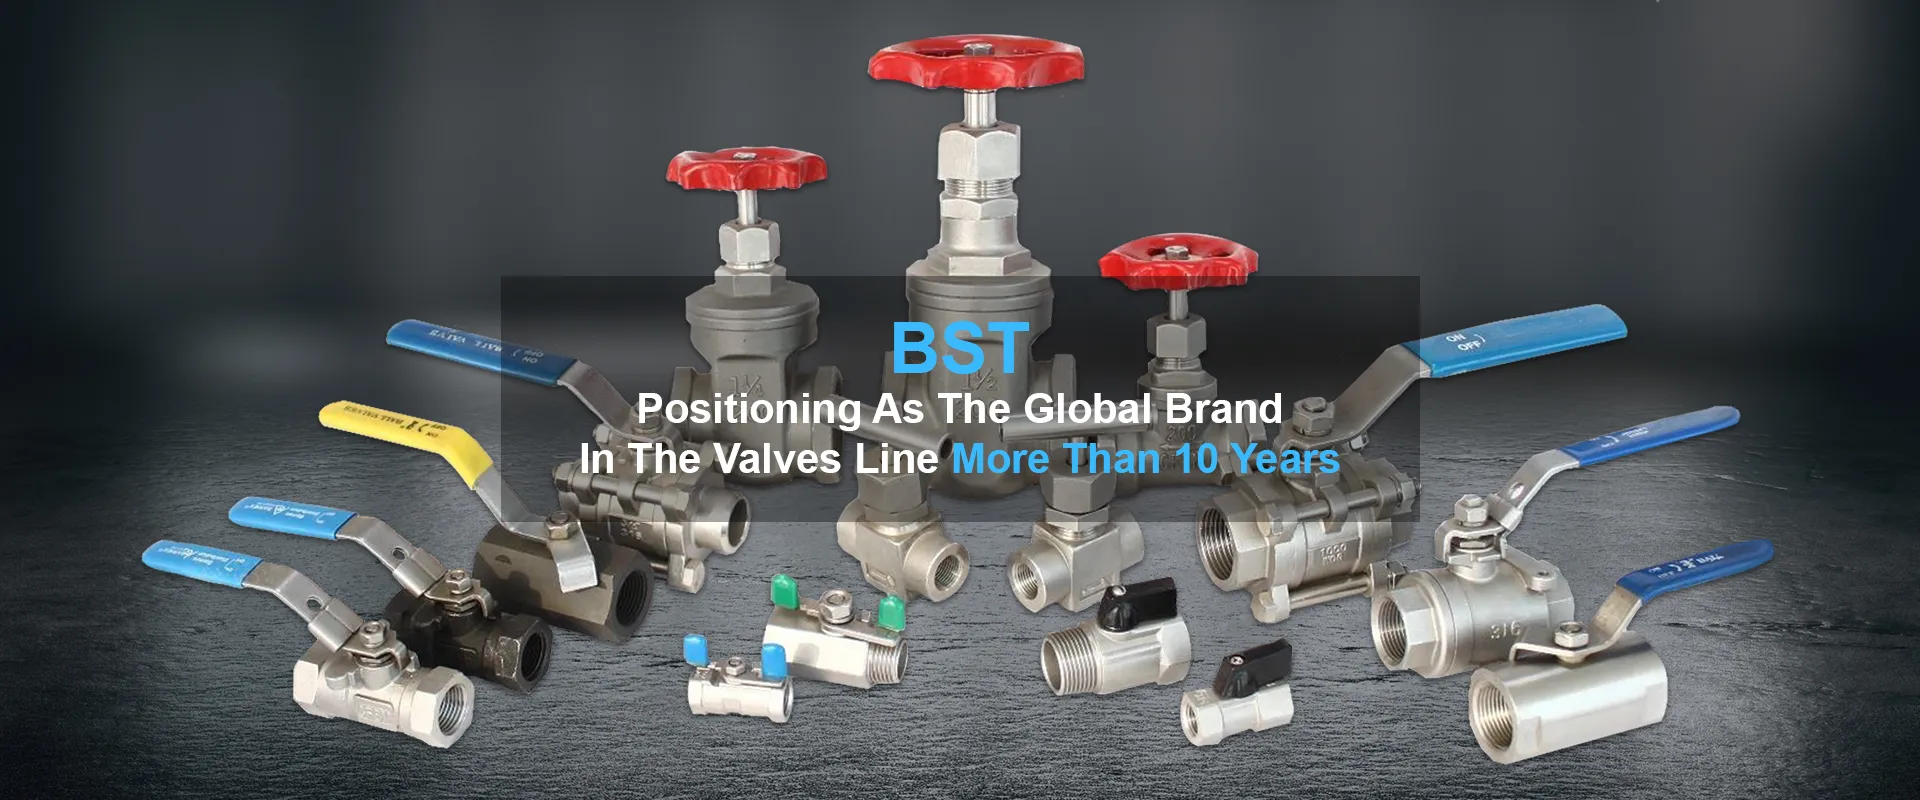 BST Positioning As The Global Brand InThe Valves Line More Than10Years